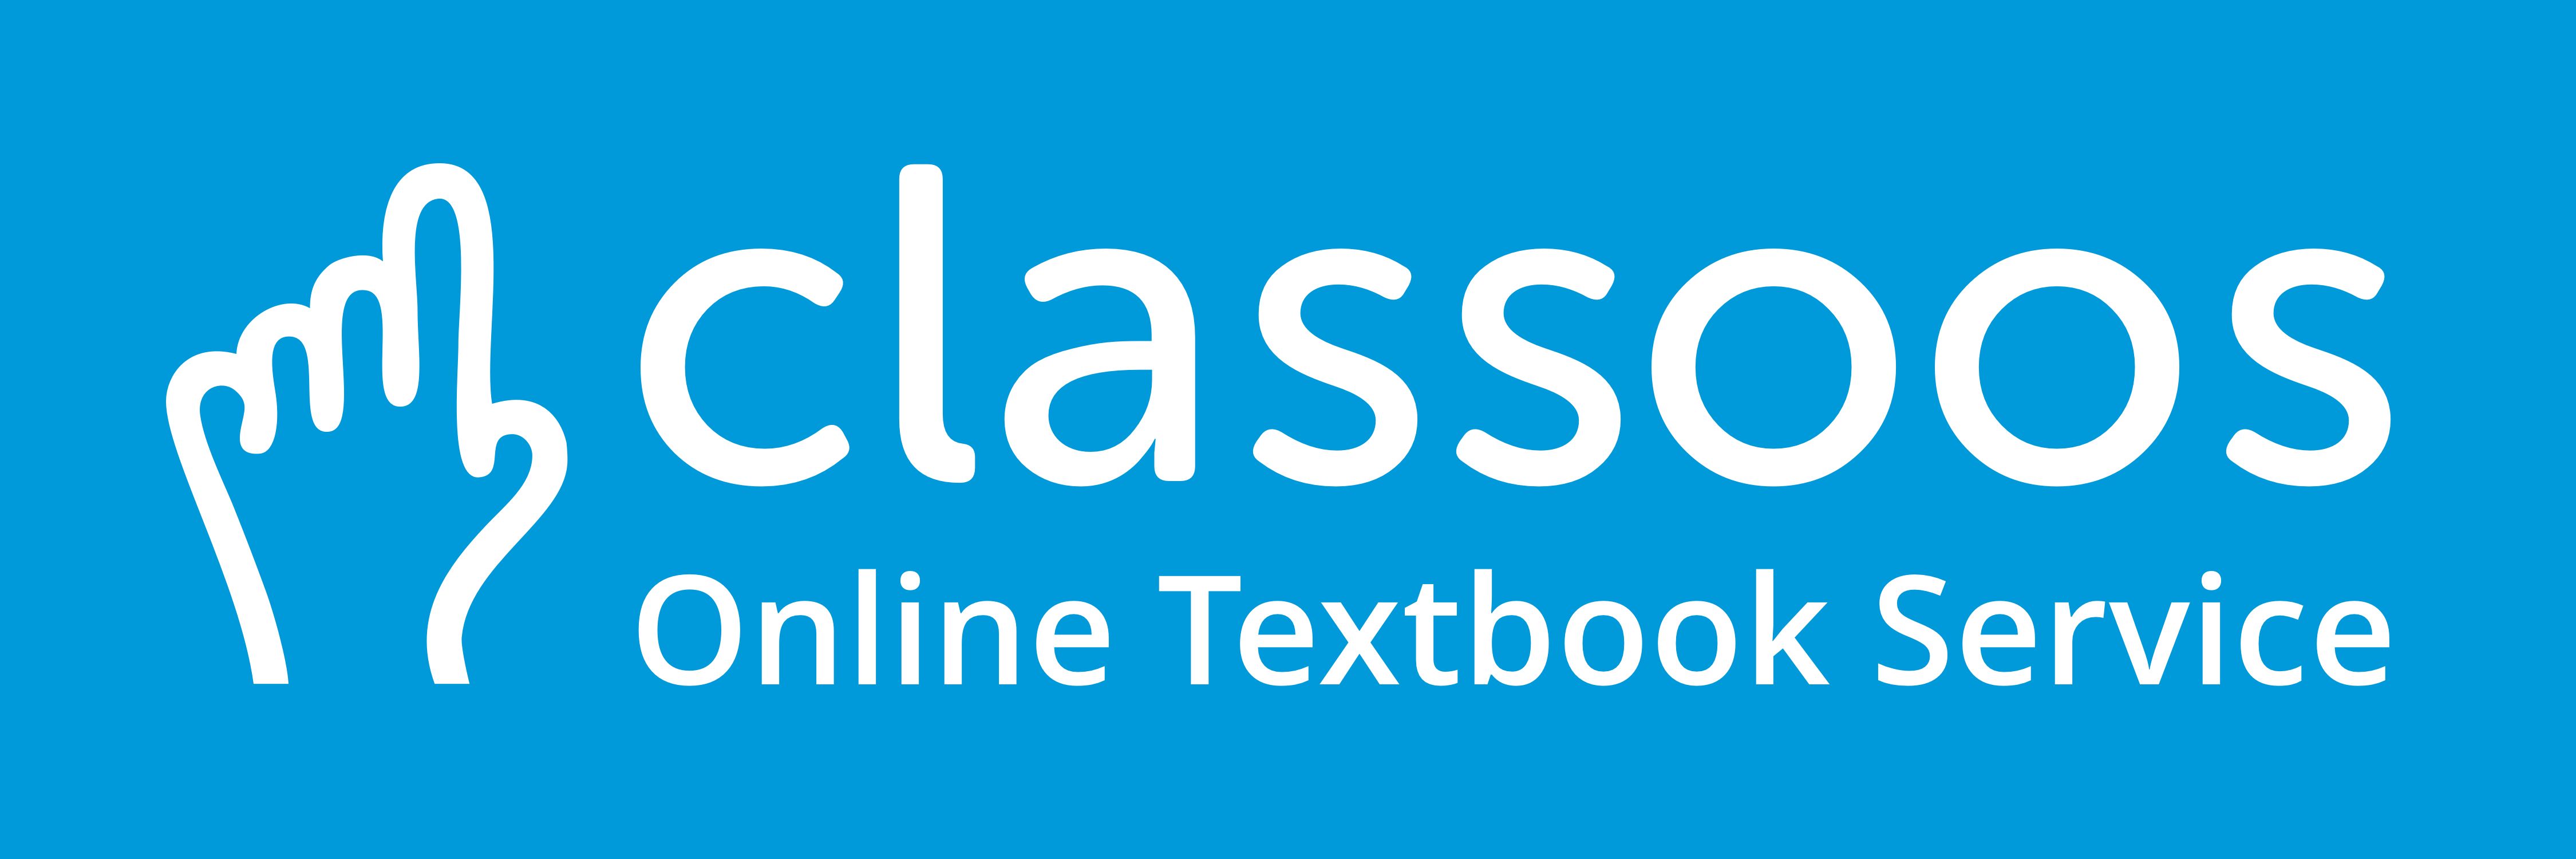 Embracing the change: Classoos experiences rapid growth as schools go digital